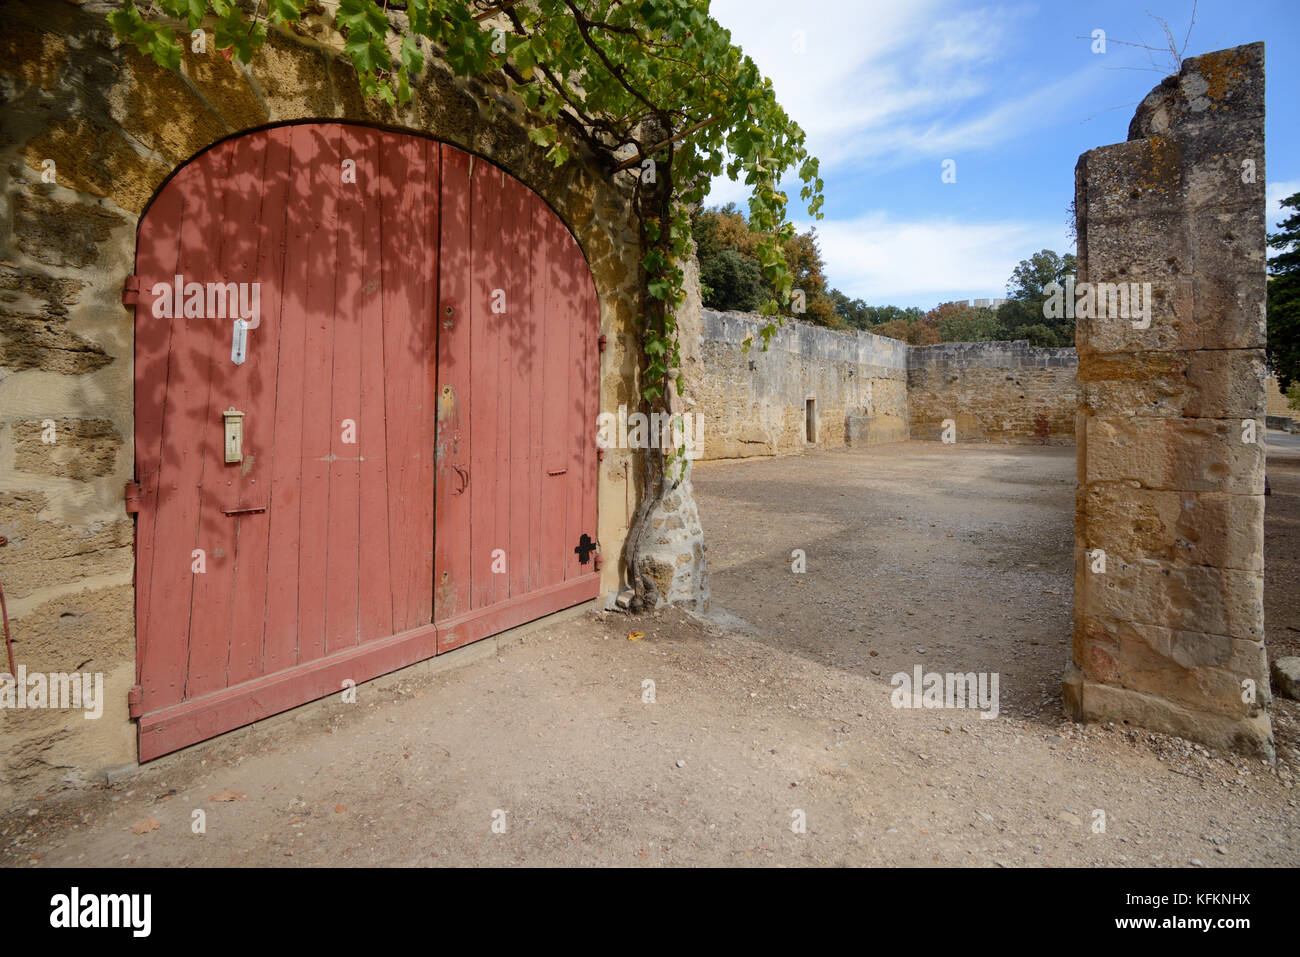 Jeu de Paume Tennis Court (c16th) Suze-la-Rousse. Built so Charles IX could play on his visit in 1564. One of few courts still surviving in France. Stock Photo